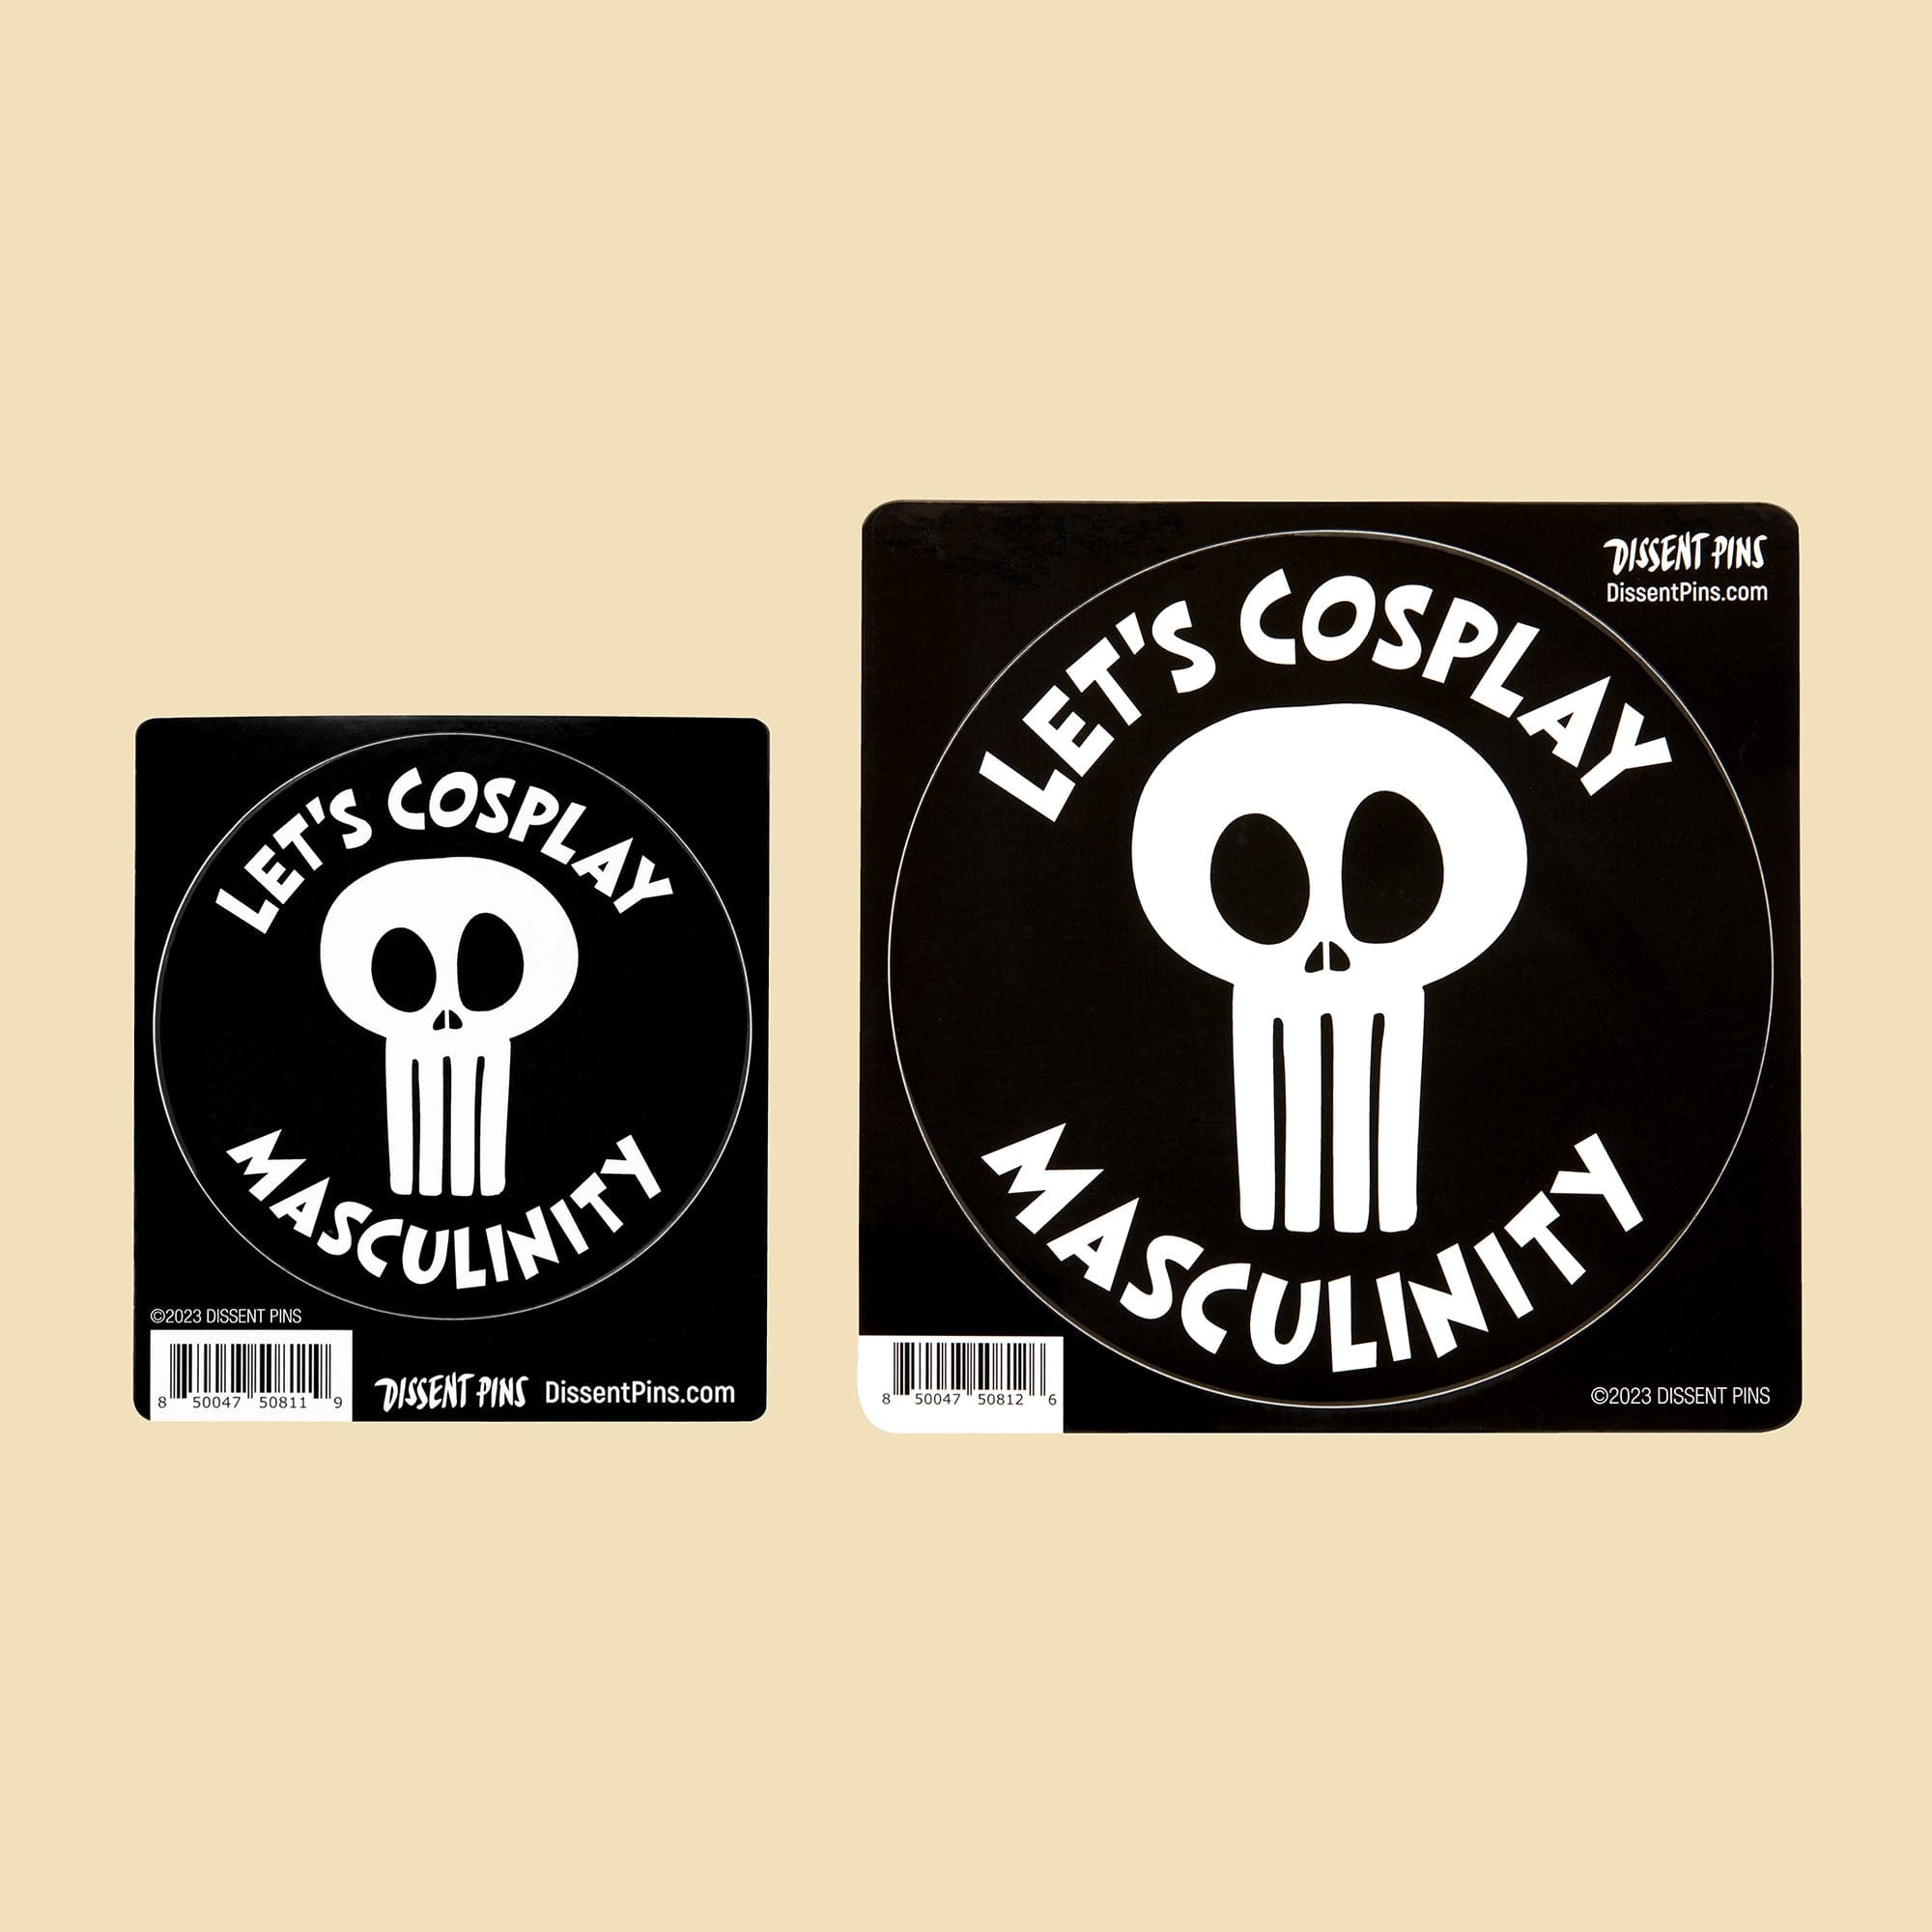 Let's Cosplay Masculinity - Sticker